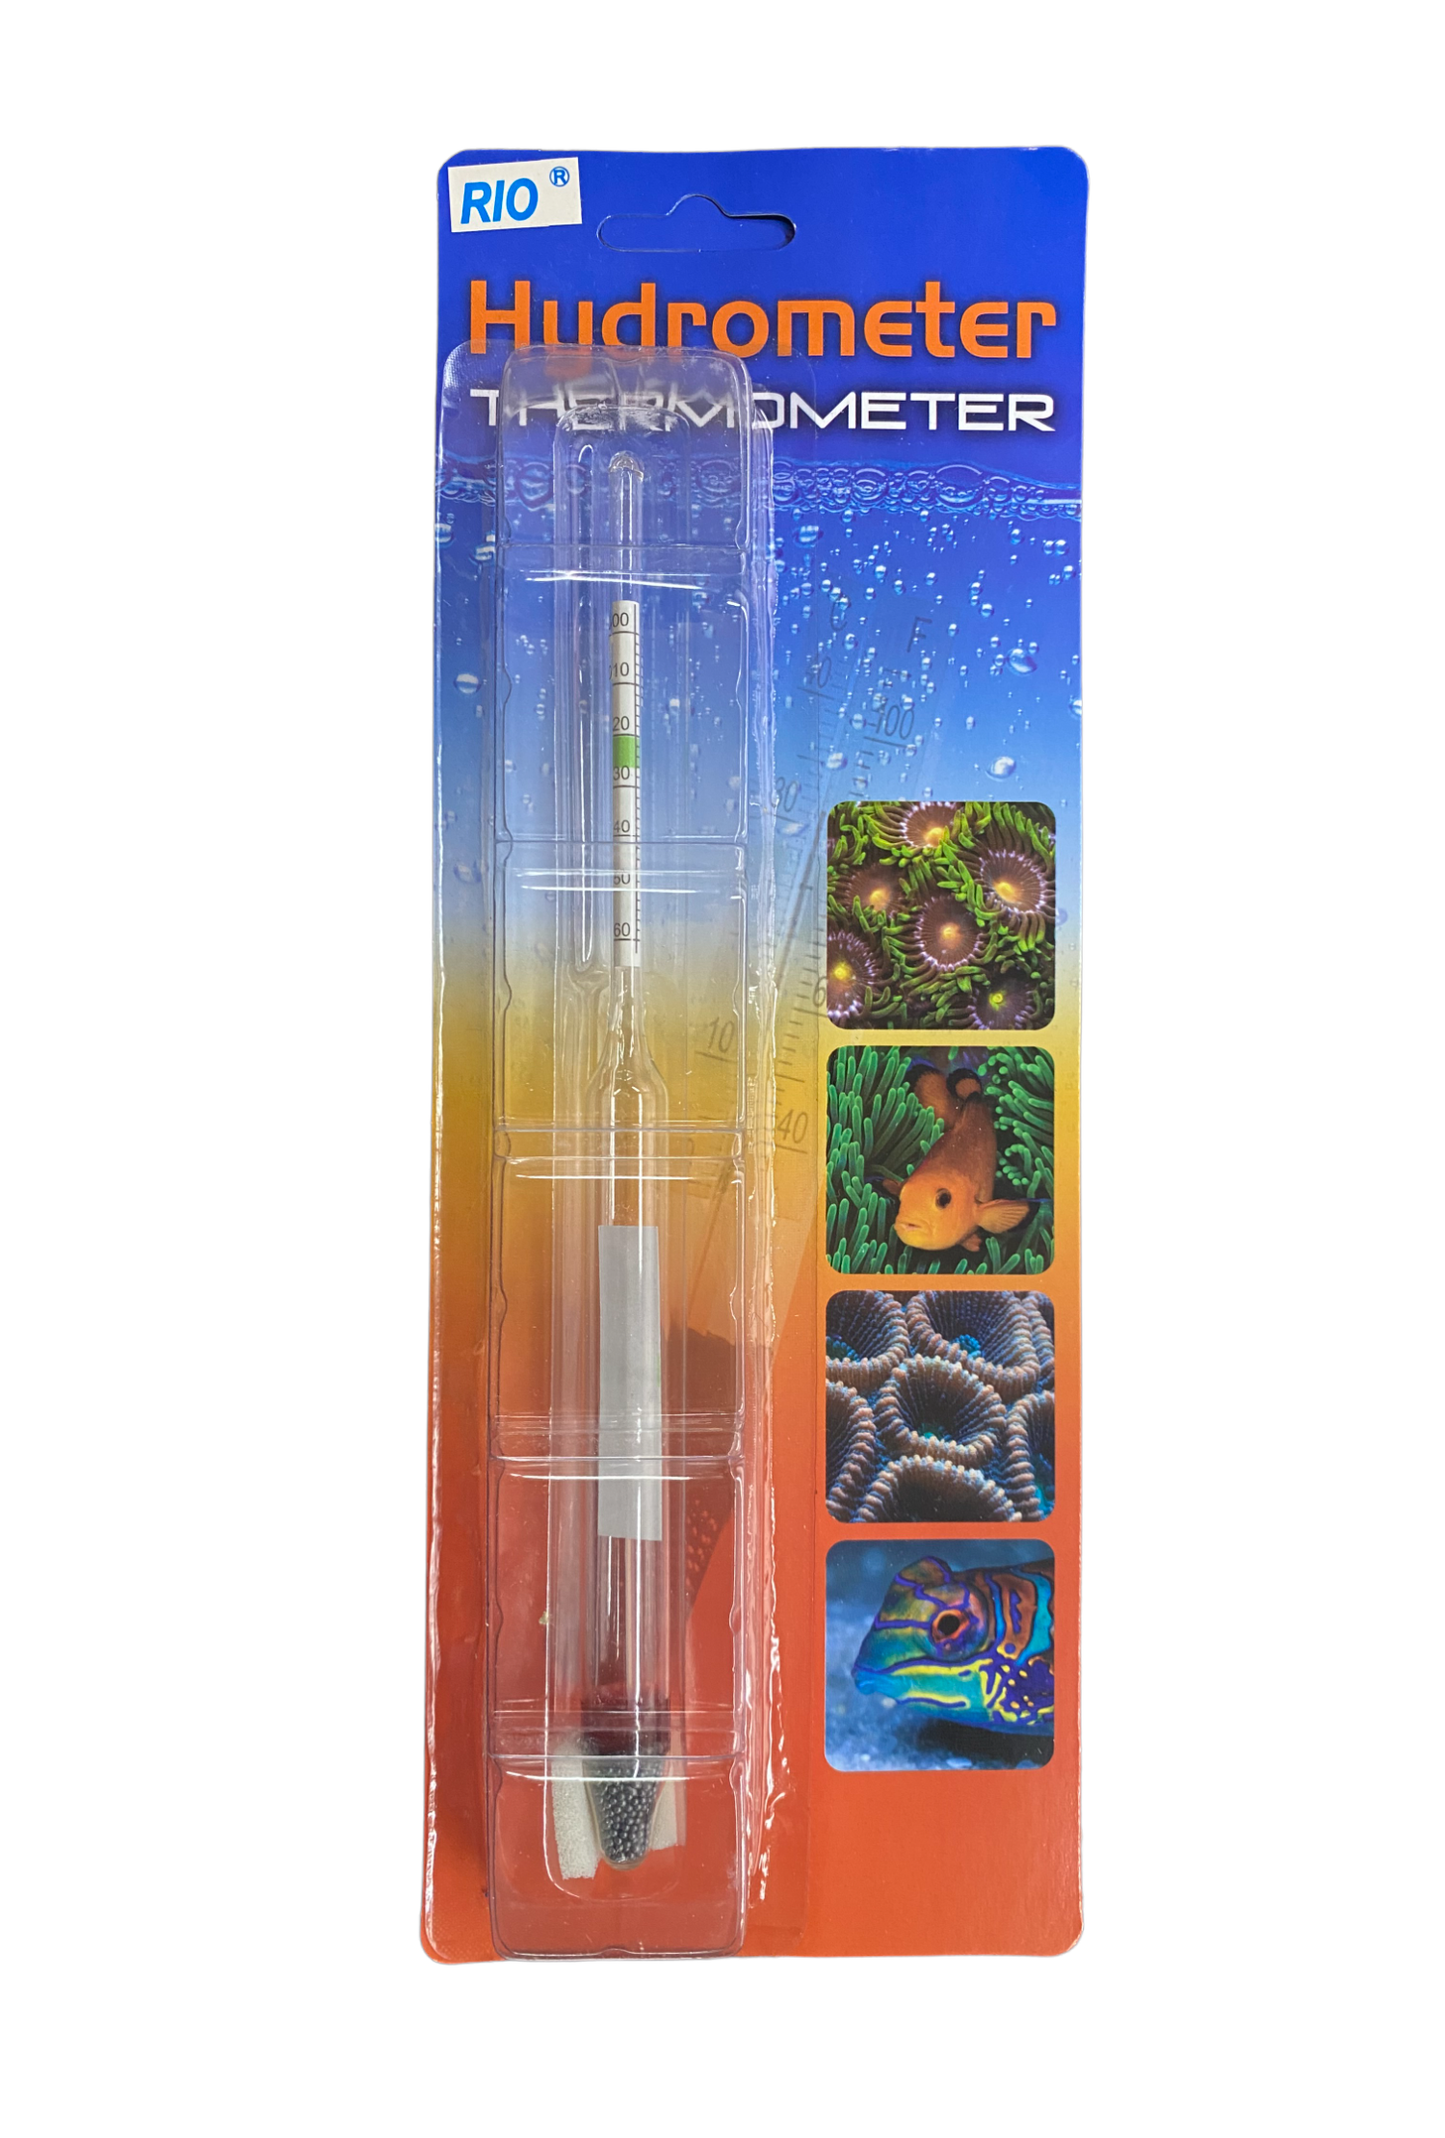 Rio Hydrometer Specific Gravity Meter Thermometer Part# HY2971